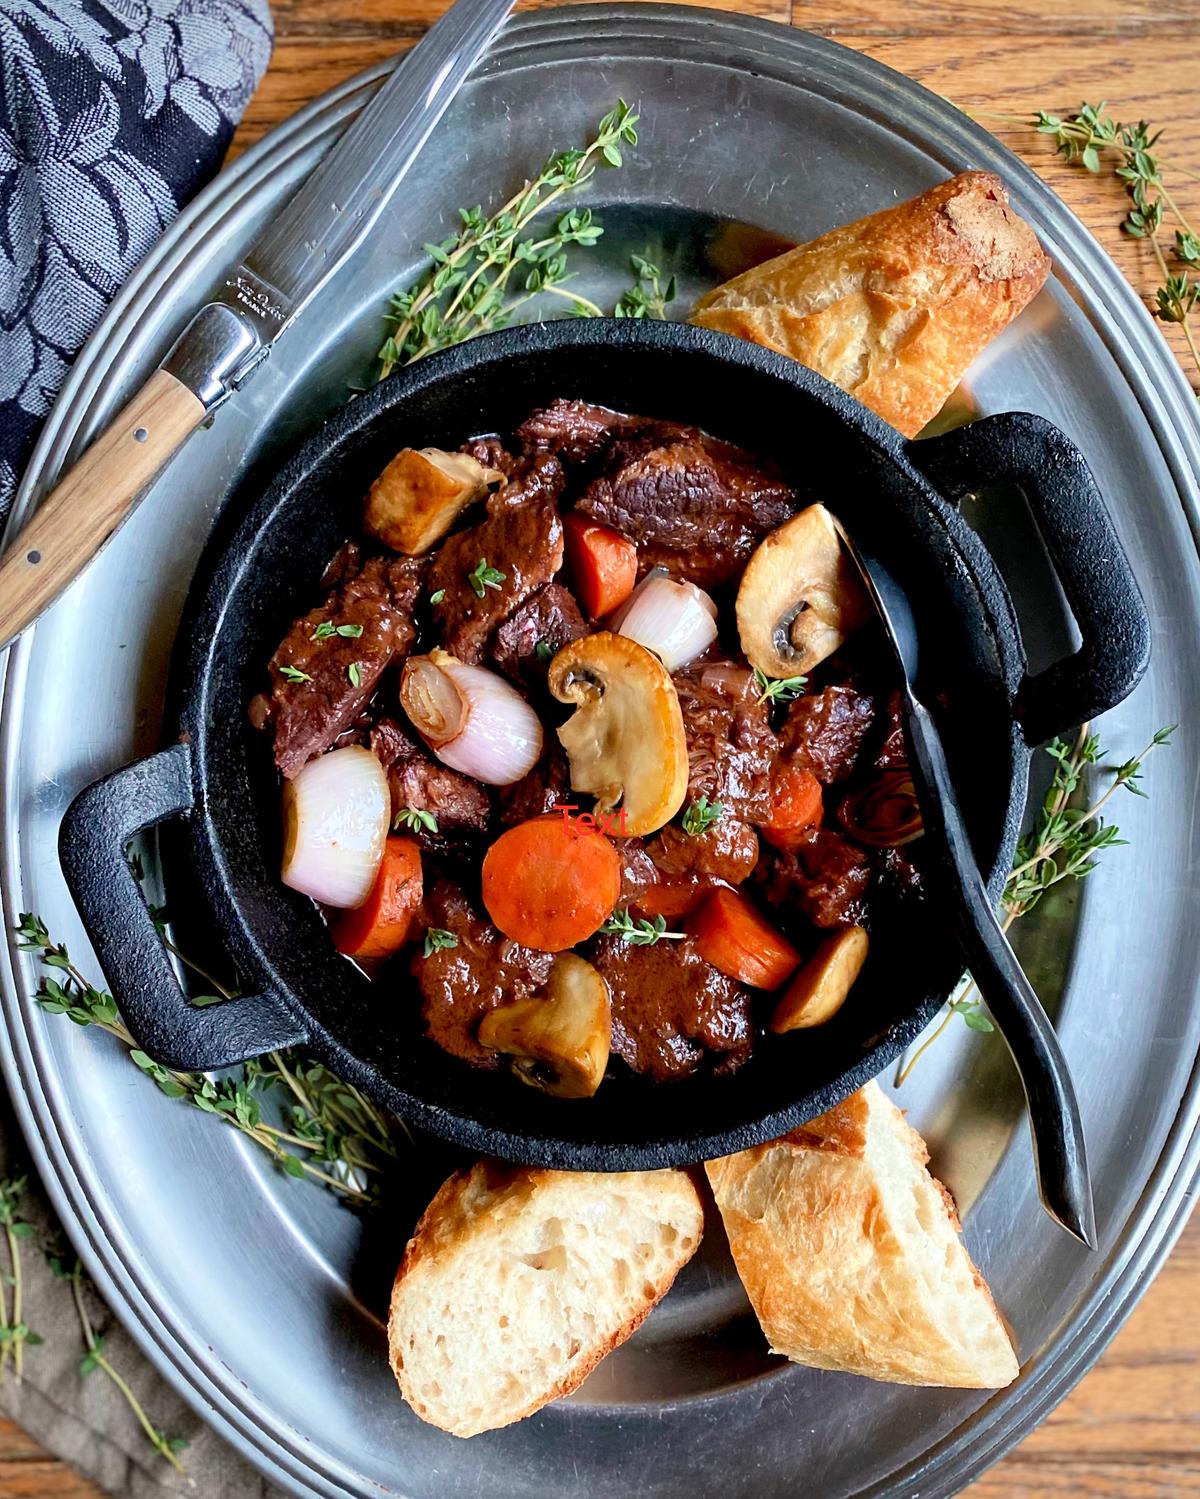 This slow-cooked bowl of warmth will cheer you up on a cold, late winter night. (Lynda Balslev for Tastefood)